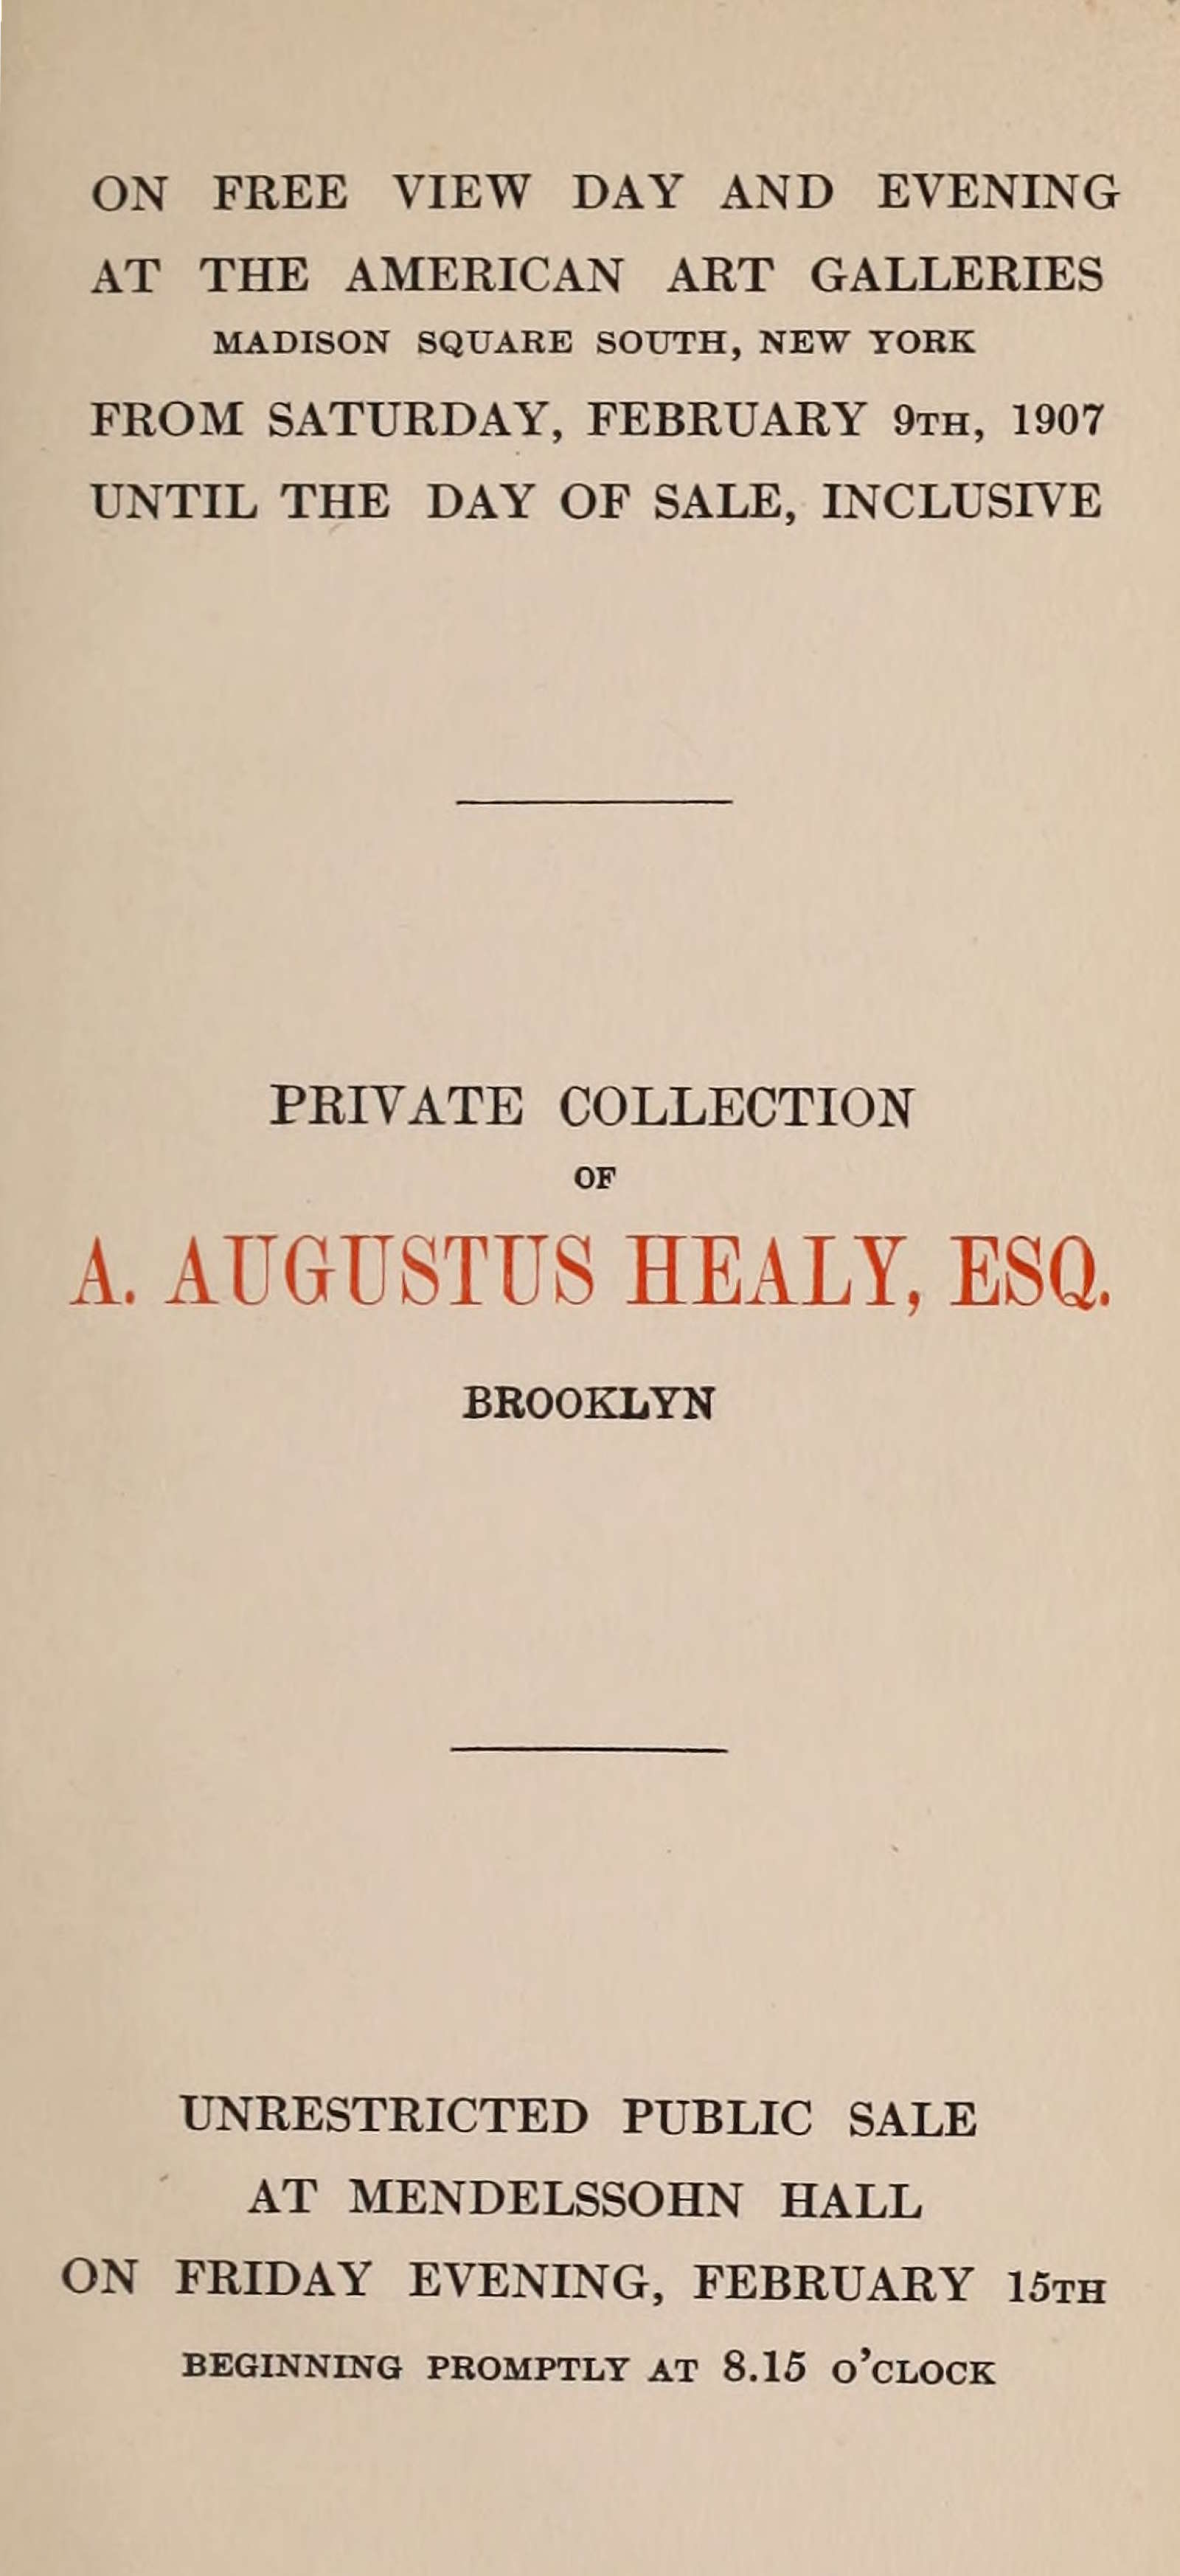 Catalogue of valuable paintings and water colors mostly of the modern Dutch school, forming the private collection of A. Augustus Healy, Esq., Brooklyn